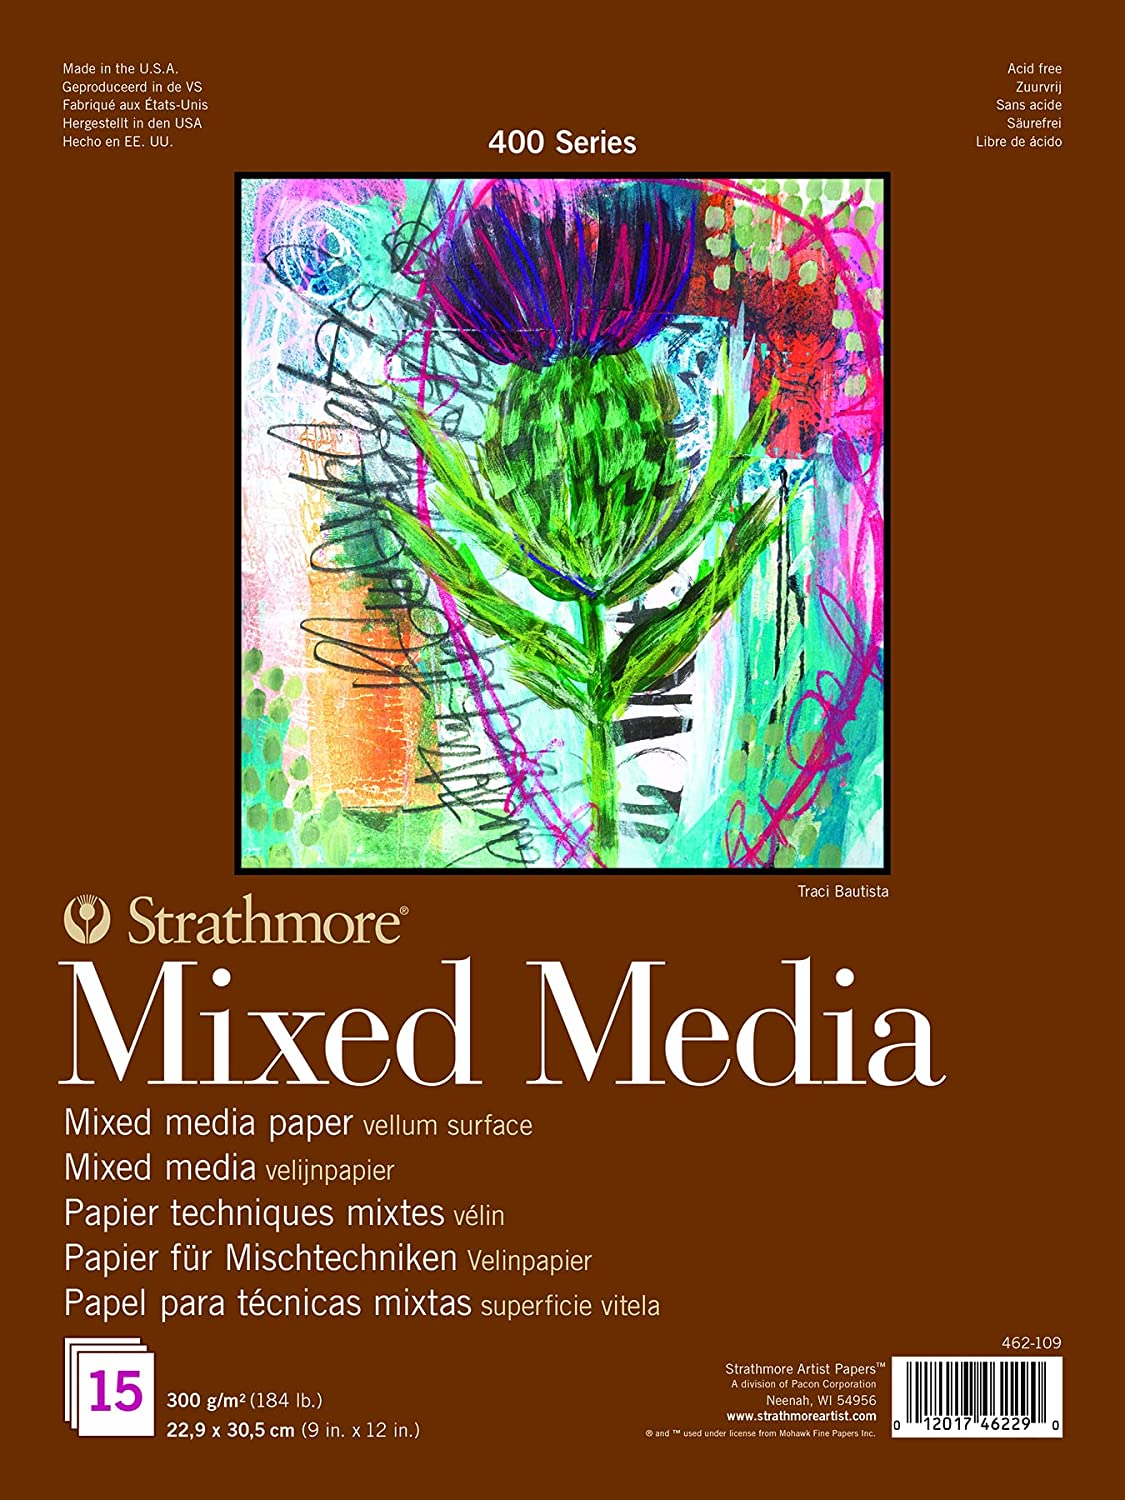 Strathmore Mixed Media Vellum Spiral Paper Pad 9X12-40 Sheets -62362900 &  455-3, 400 Series Sketch Pad, 9x12 Wire Bound, 100 Sheets, White